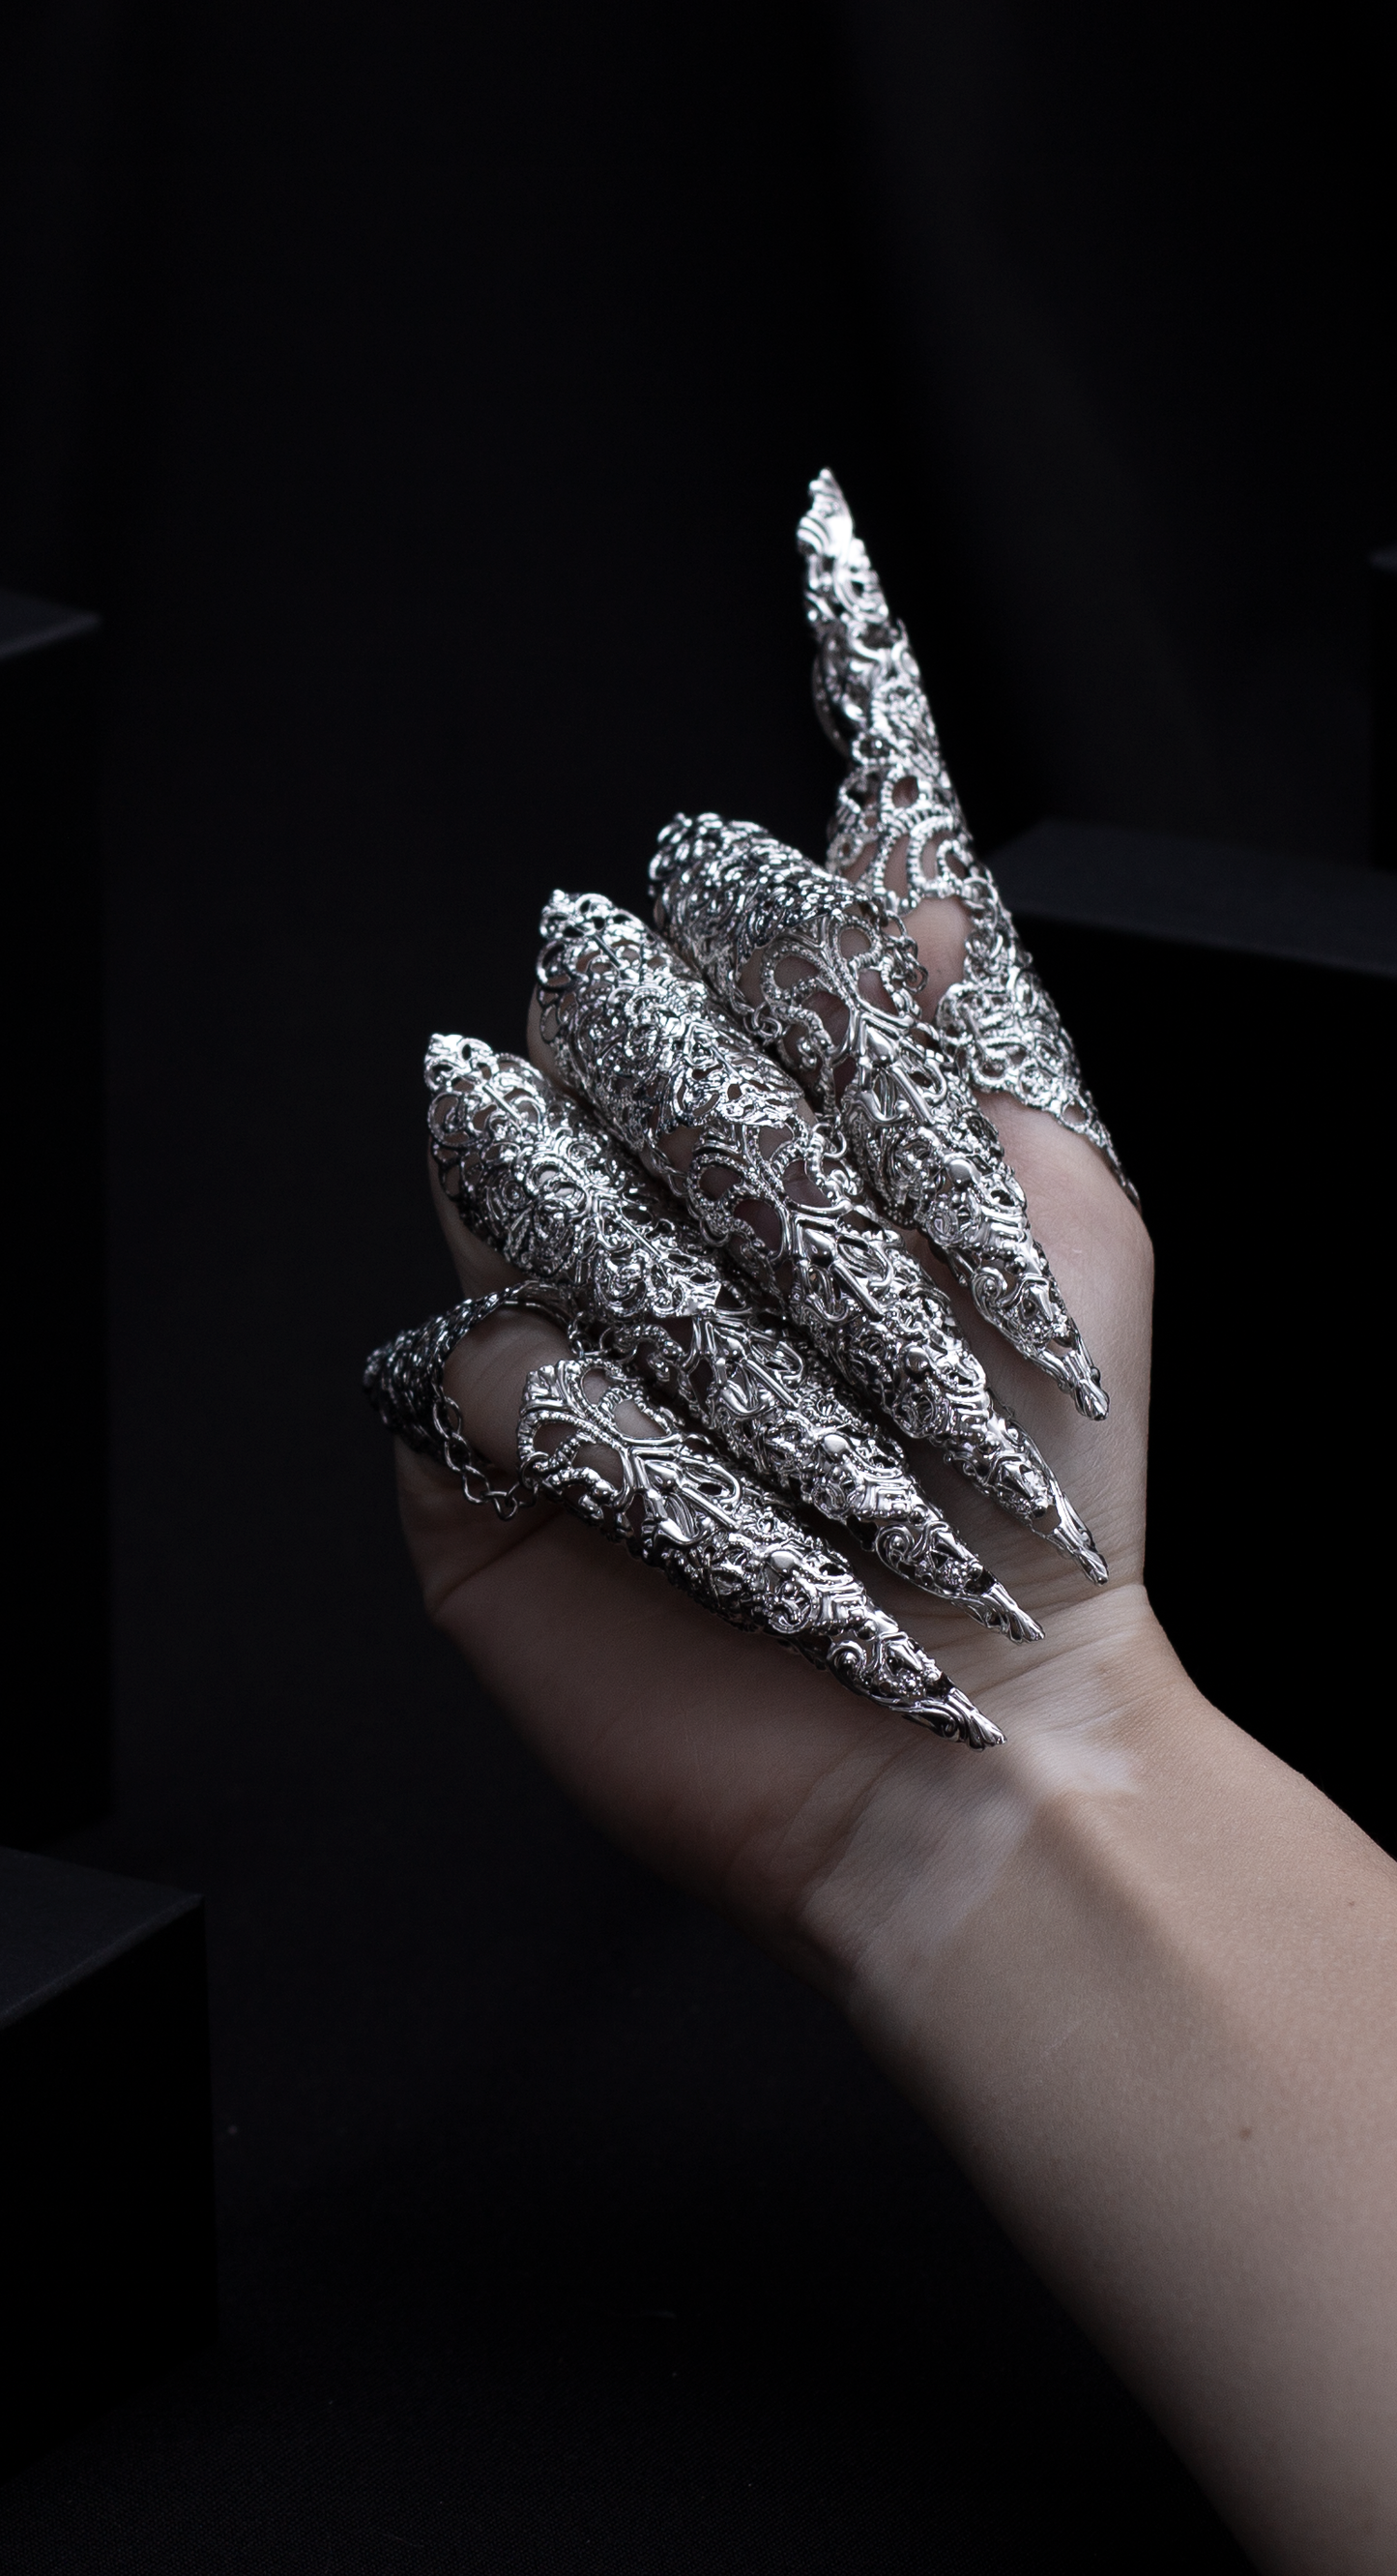 "A hand emerges from the shadows, flaunting Myril Jewels' midi rings with striking long claws, a perfect blend of neo-gothic flair and dark avant-garde elegance. This bold jewelry makes an ideal statement for Halloween, adding a touch of gothic-chic to any outfit.